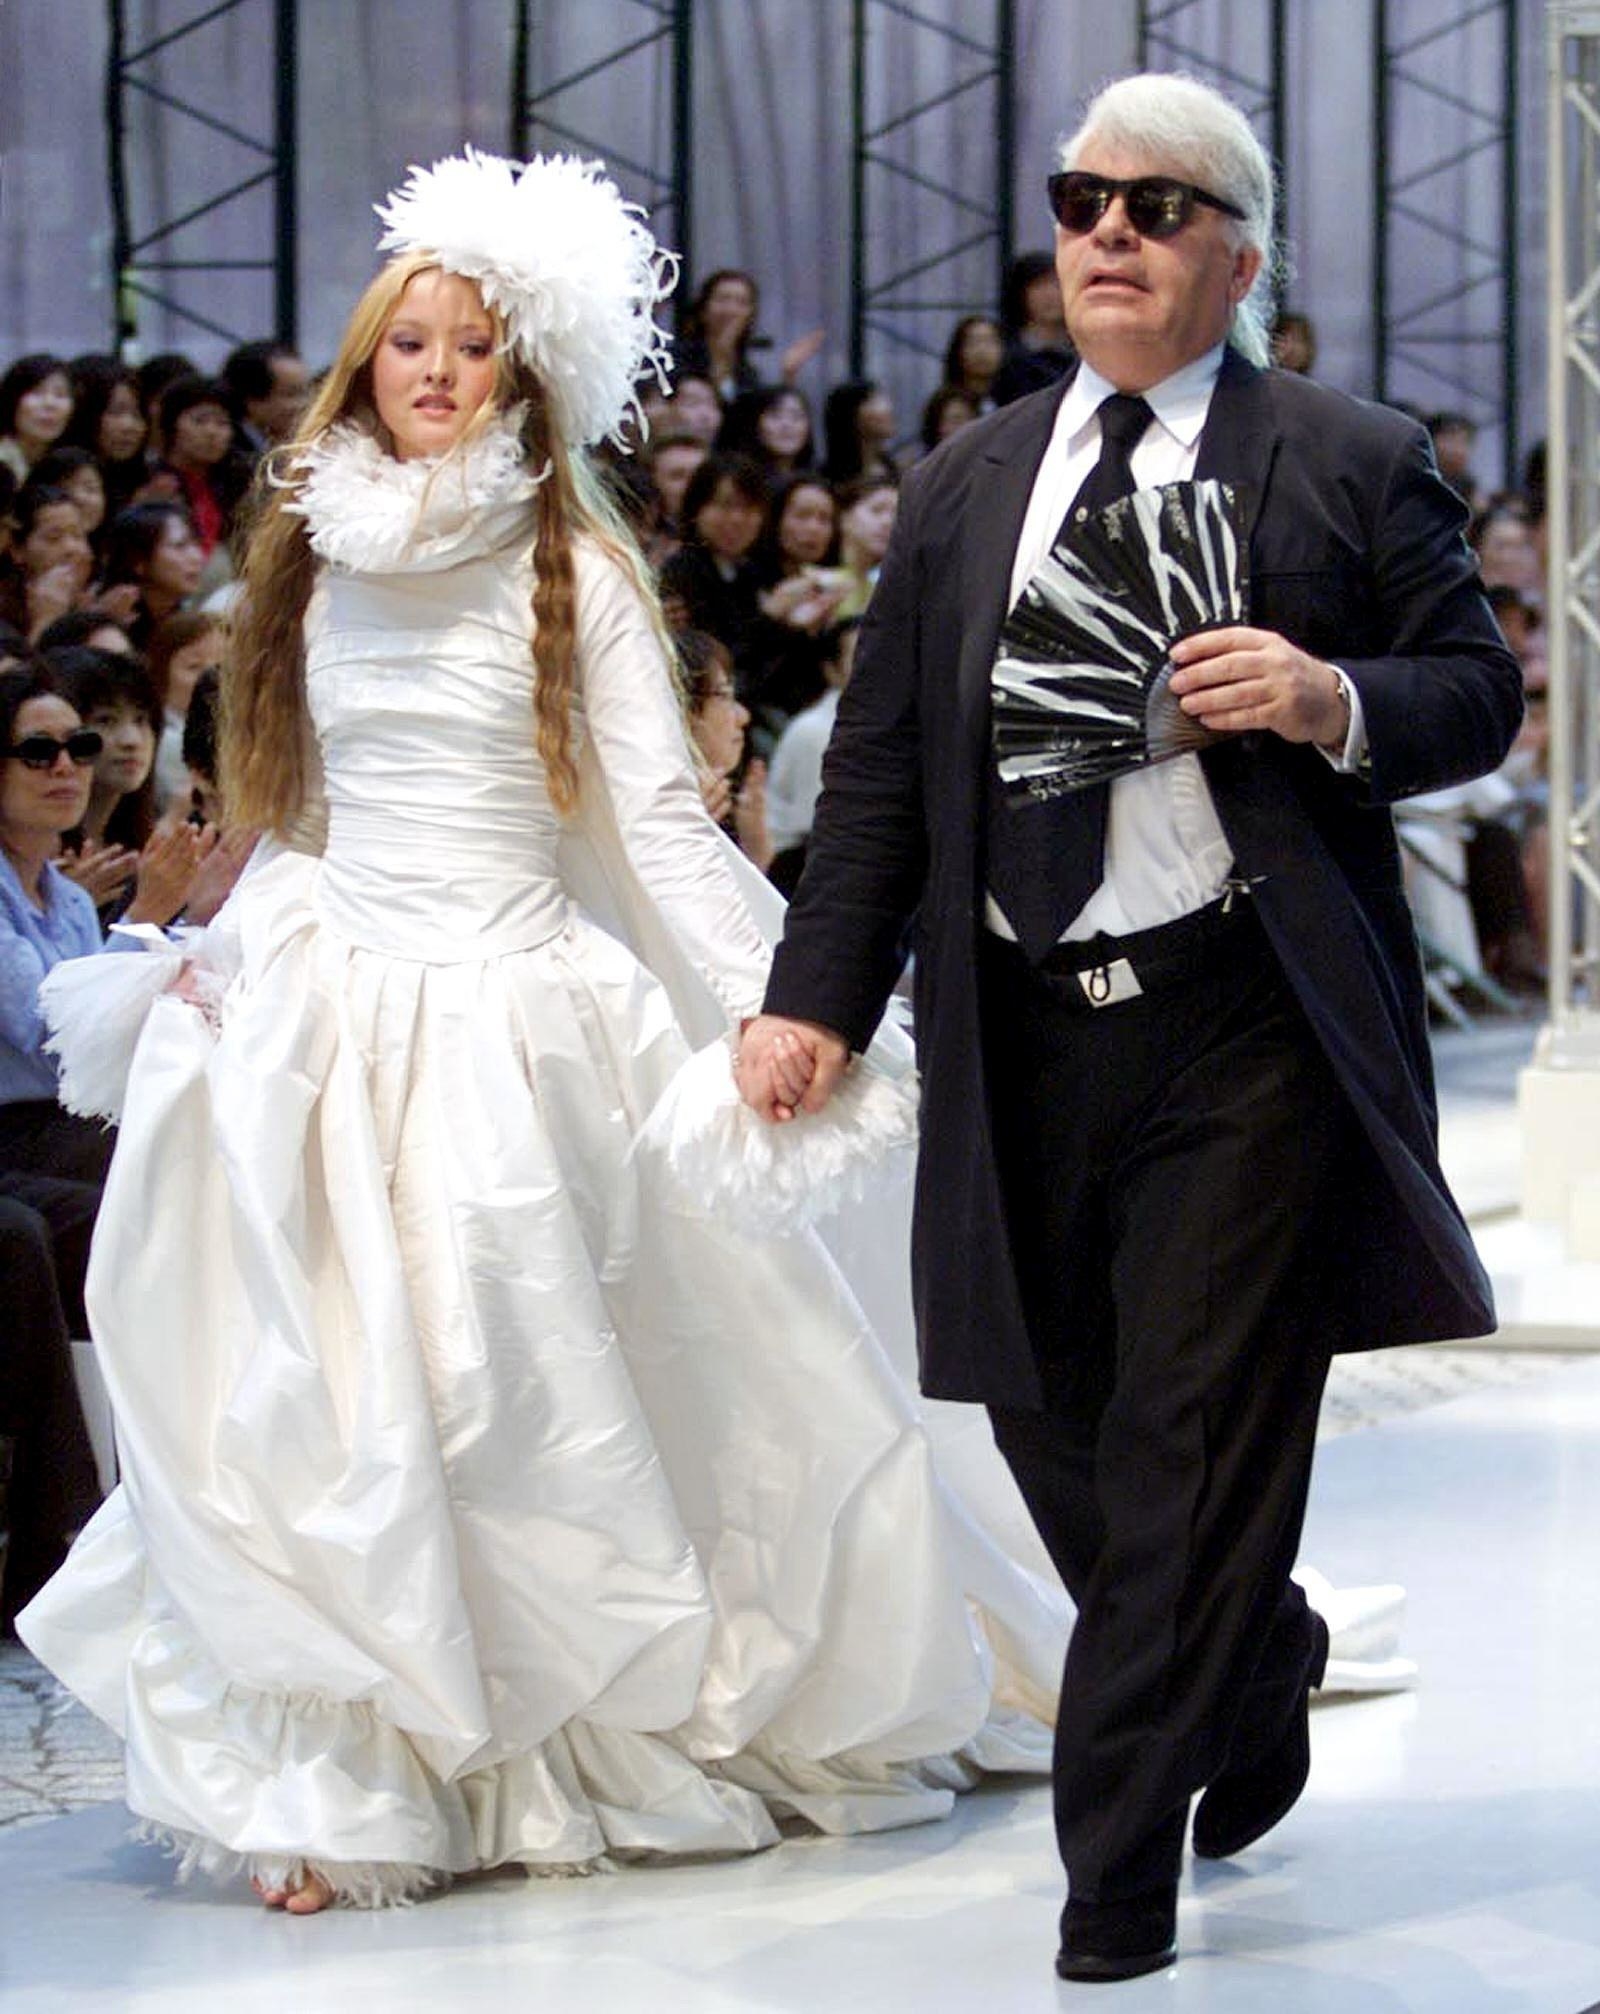 German designer Karl Lagerfeld of Chanel leads model Devon Aoki wearing a wedding dress during the autumn/winter 2000-2001 Chanel collection